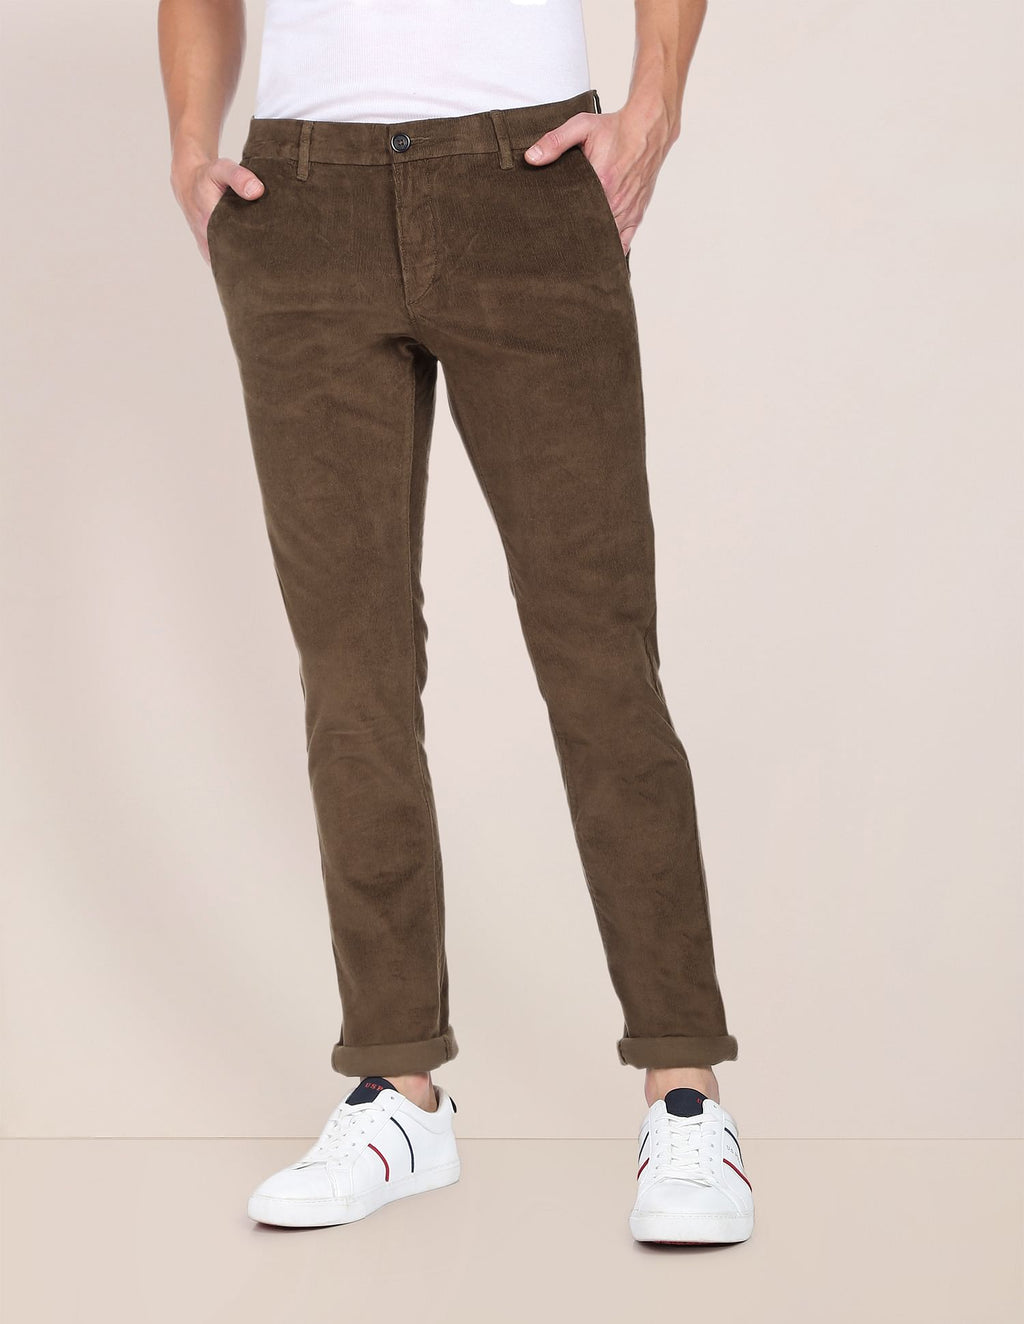 River Of Design Jeans Women Beige Loose Fit High-Rise Corduroy Trousers  Price in India, Full Specifications & Offers | DTashion.com